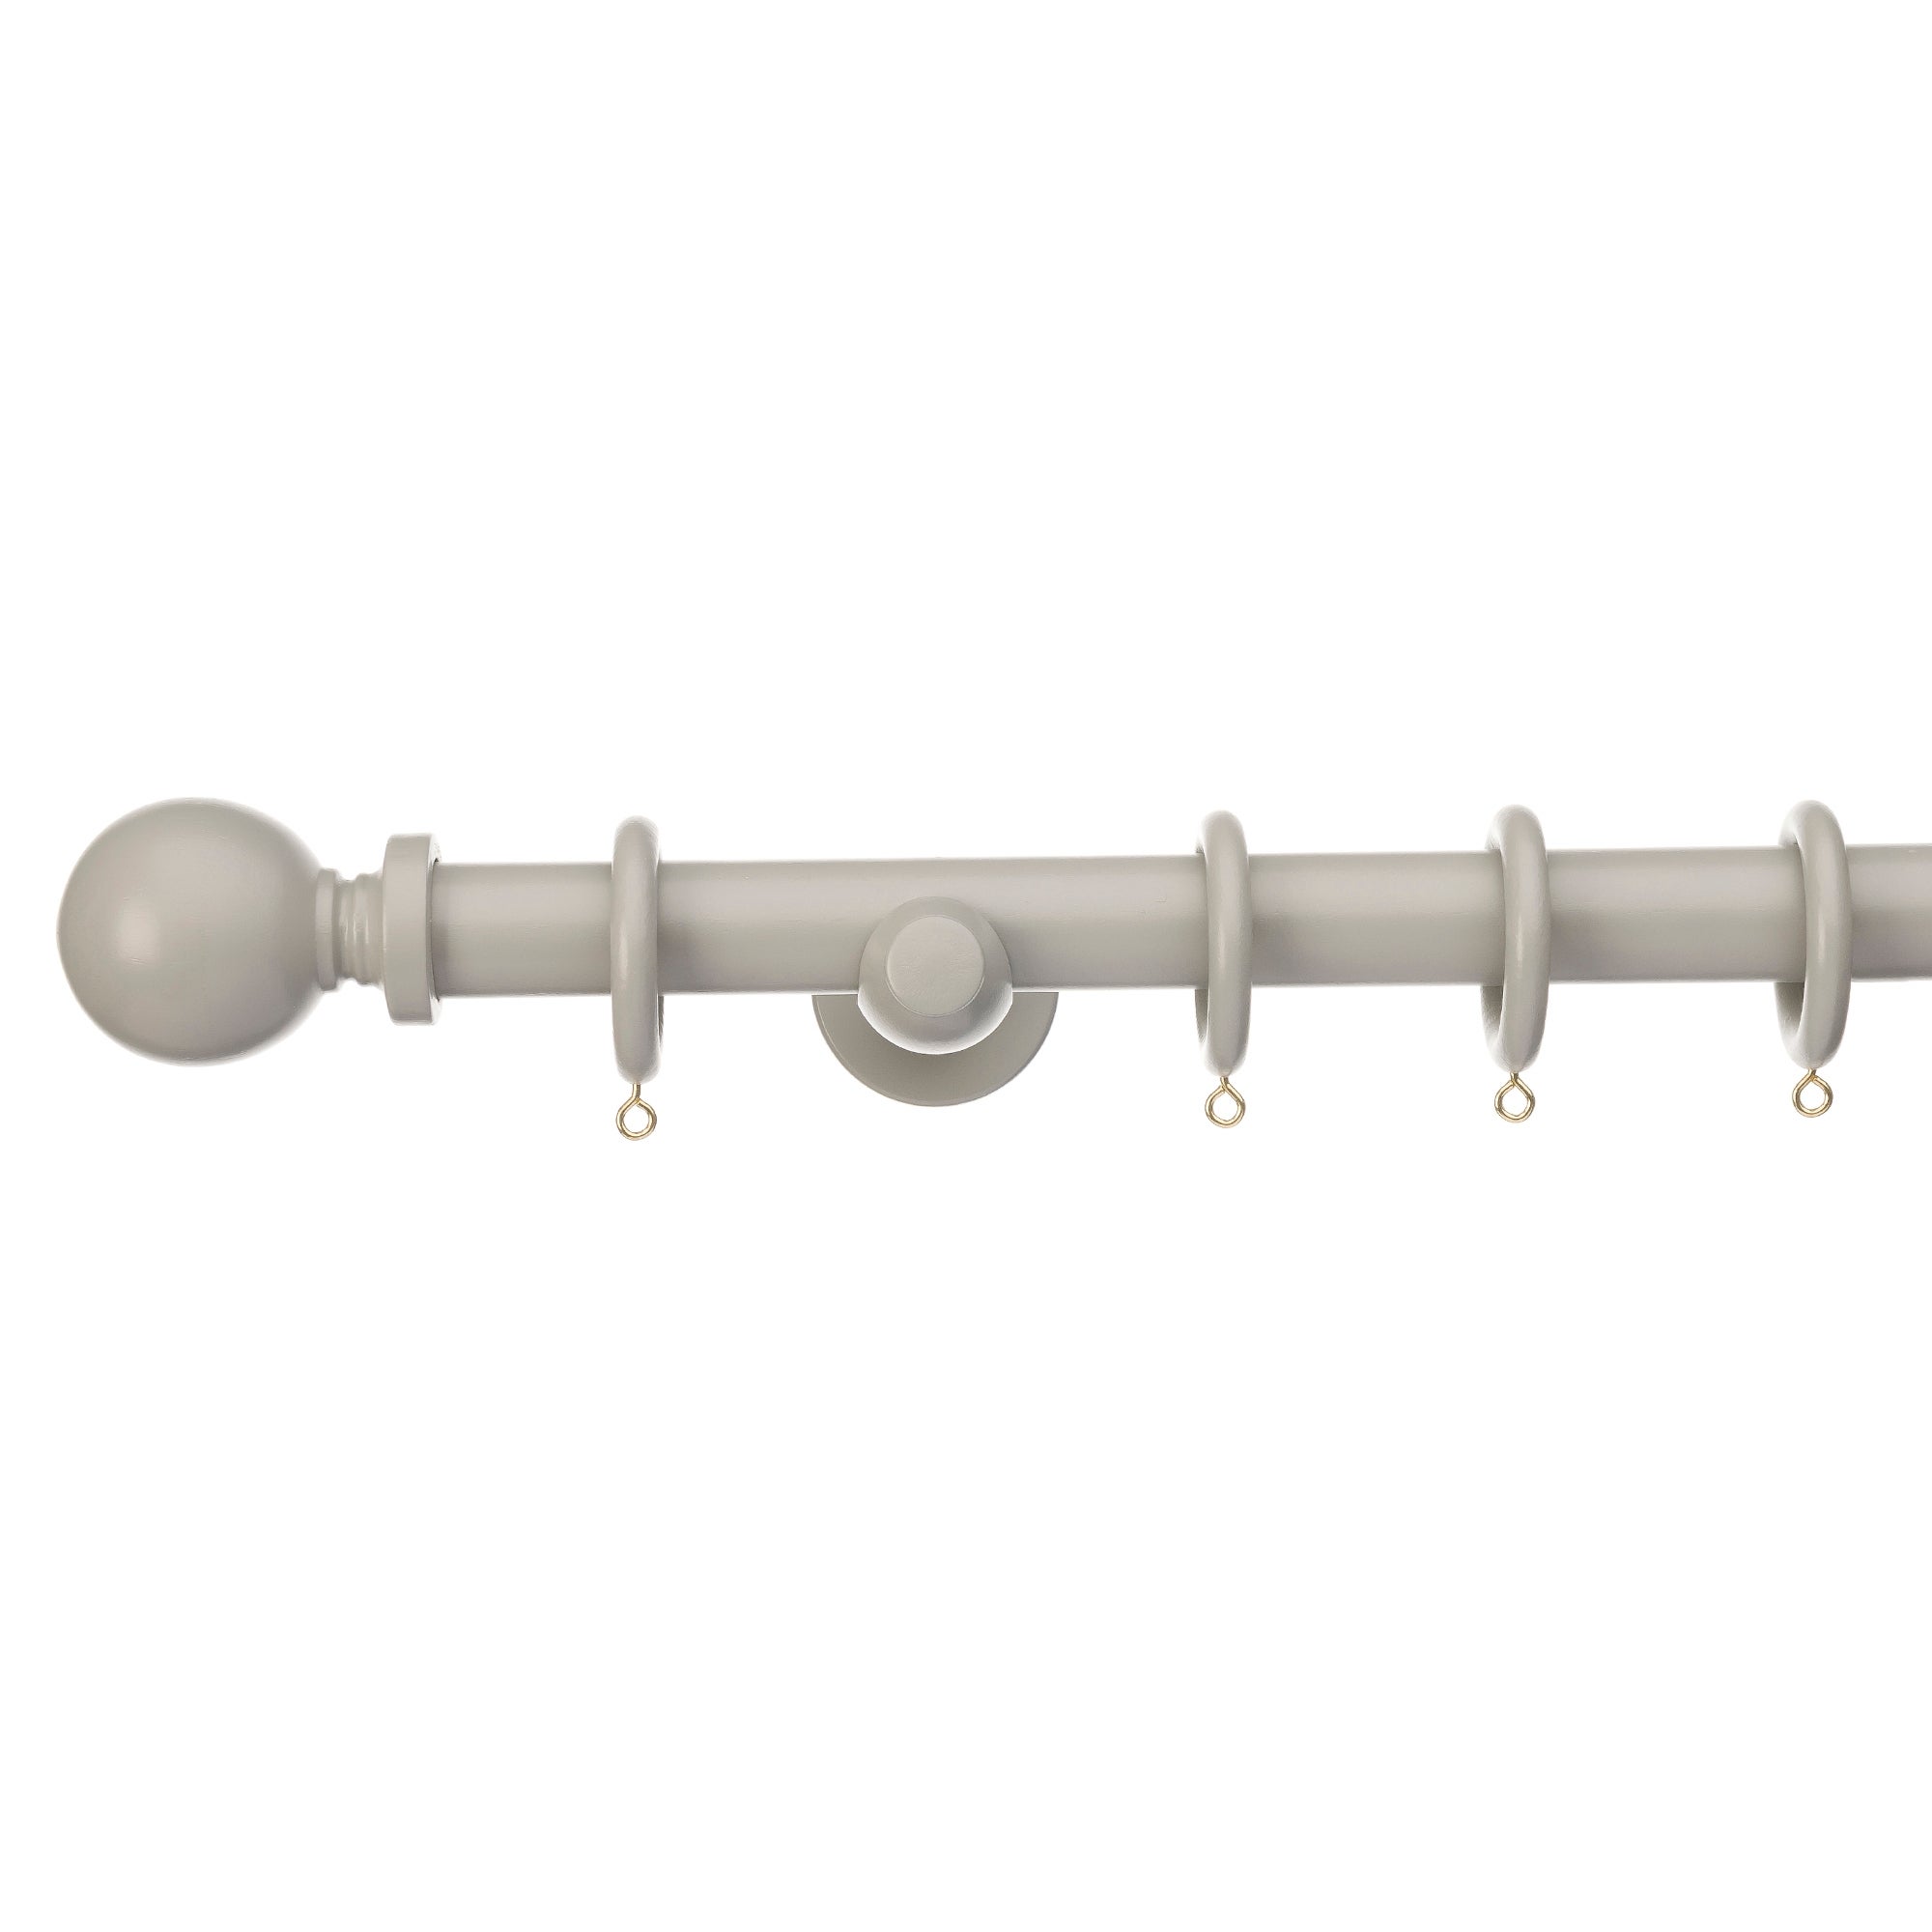 Ashton Fixed Wooden Curtain Pole with Rings